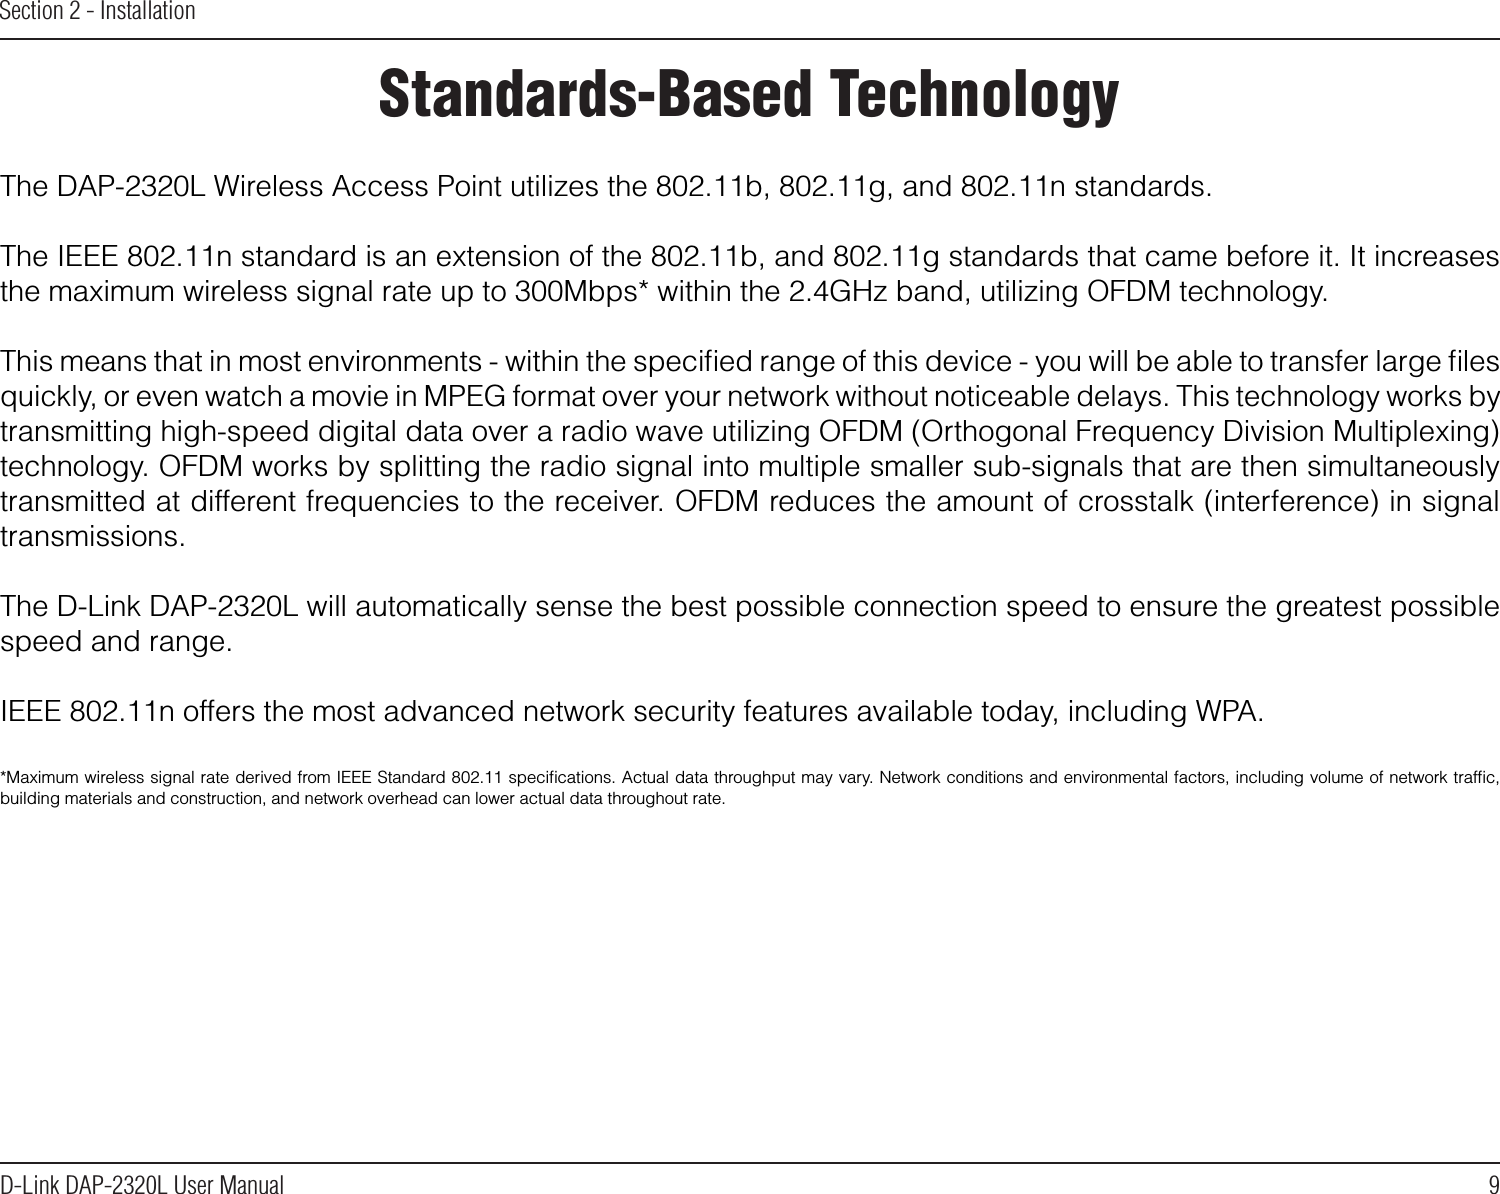 9D-Link DAP-2320L User ManualSection 2 - InstallationStandards-Based TechnologyThe DAP-2320L Wireless Access Point utilizes the 802.11b, 802.11g, and 802.11n standards.The IEEE 802.11n standard is an extension of the 802.11b, and 802.11g standards that came before it. It increases the maximum wireless signal rate up to 300Mbps* within the 2.4GHz band, utilizing OFDM technology.This means that in most environments - within the speciﬁed range of this device - you will be able to transfer large ﬁles quickly, or even watch a movie in MPEG format over your network without noticeable delays. This technology works by transmitting high-speed digital data over a radio wave utilizing OFDM (Orthogonal Frequency Division Multiplexing) technology. OFDM works by splitting the radio signal into multiple smaller sub-signals that are then simultaneously transmitted at different frequencies to the receiver. OFDM reduces the amount of crosstalk (interference) in signal transmissions. The D-Link DAP-2320L will automatically sense the best possible connection speed to ensure the greatest possible speed and range.IEEE 802.11n offers the most advanced network security features available today, including WPA.*Maximum wireless signal rate derived from IEEE Standard 802.11 speciﬁcations. Actual data throughput may vary. Network conditions and environmental factors, including volume of network trafﬁc, building materials and construction, and network overhead can lower actual data throughout rate.